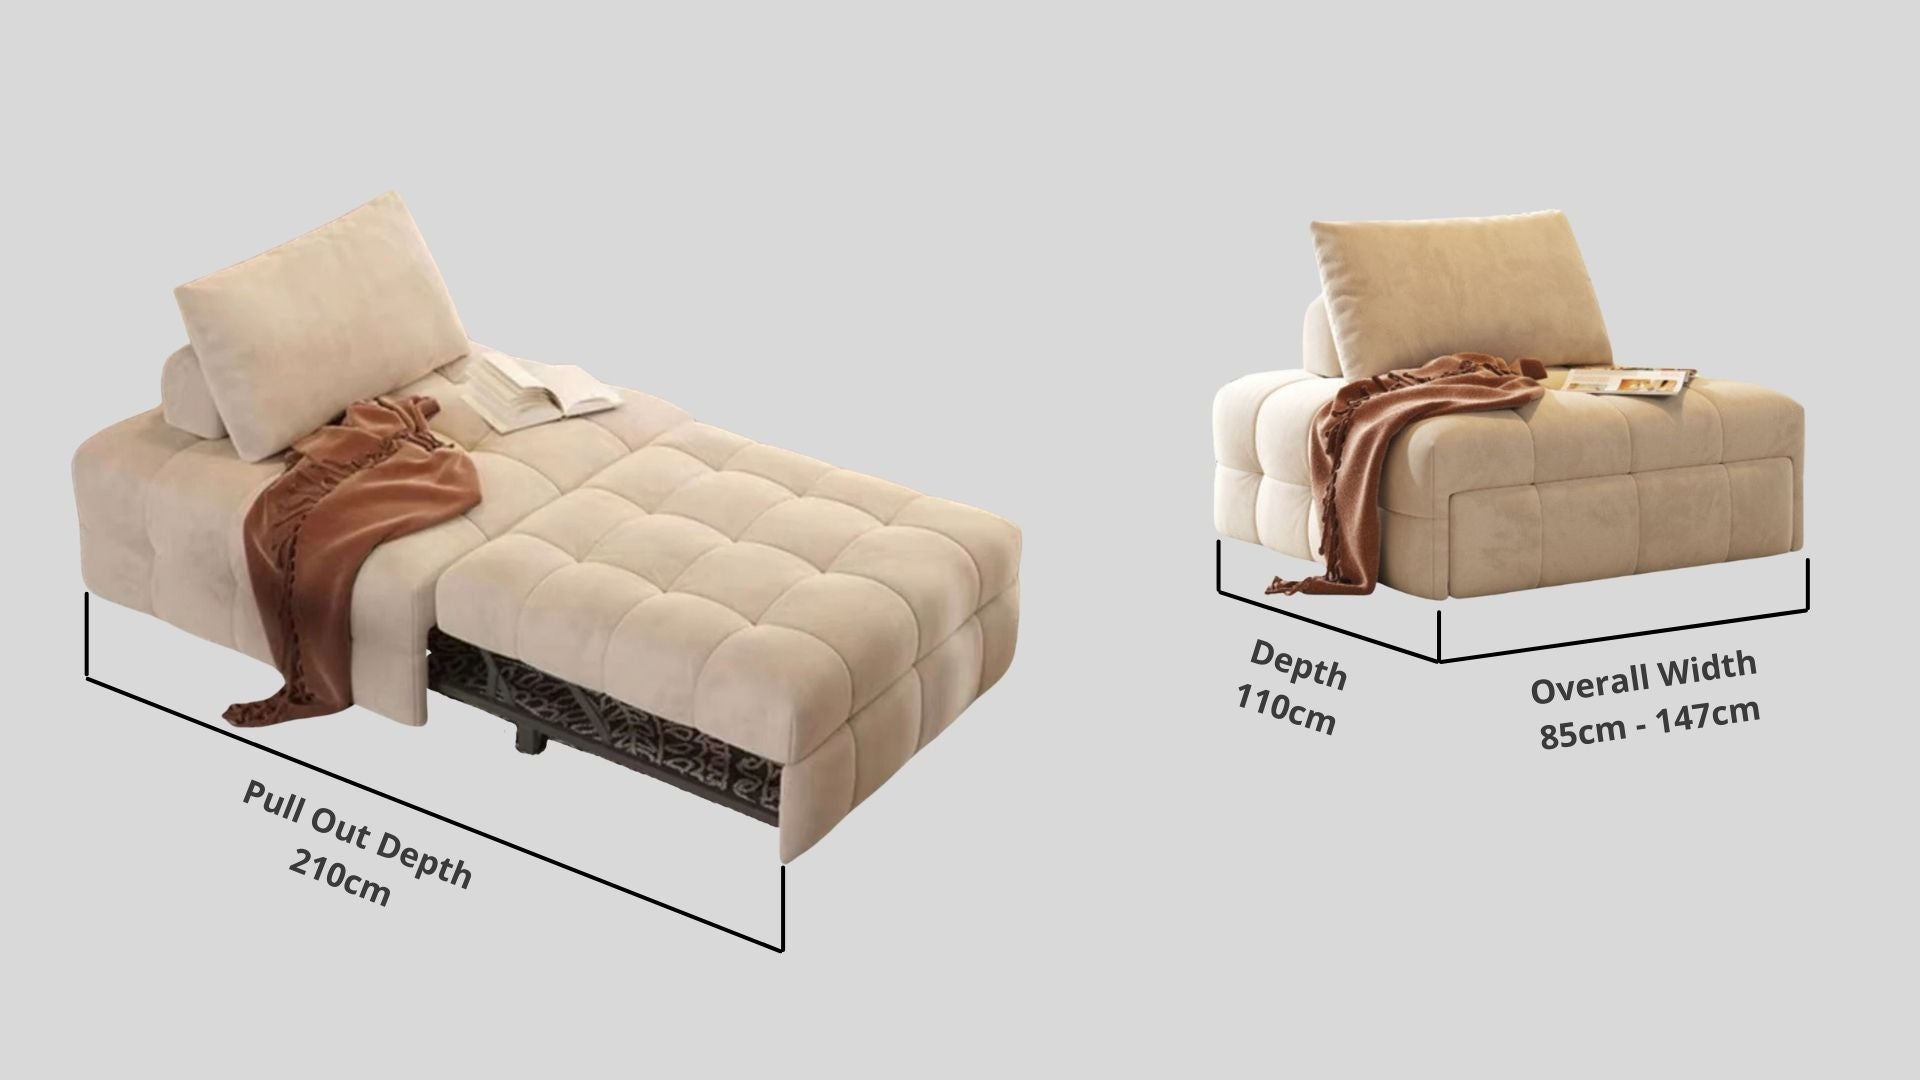 Details the key dimensions in terms of overall width, overall depth and seat width for Candy Fabric Sofa Bed